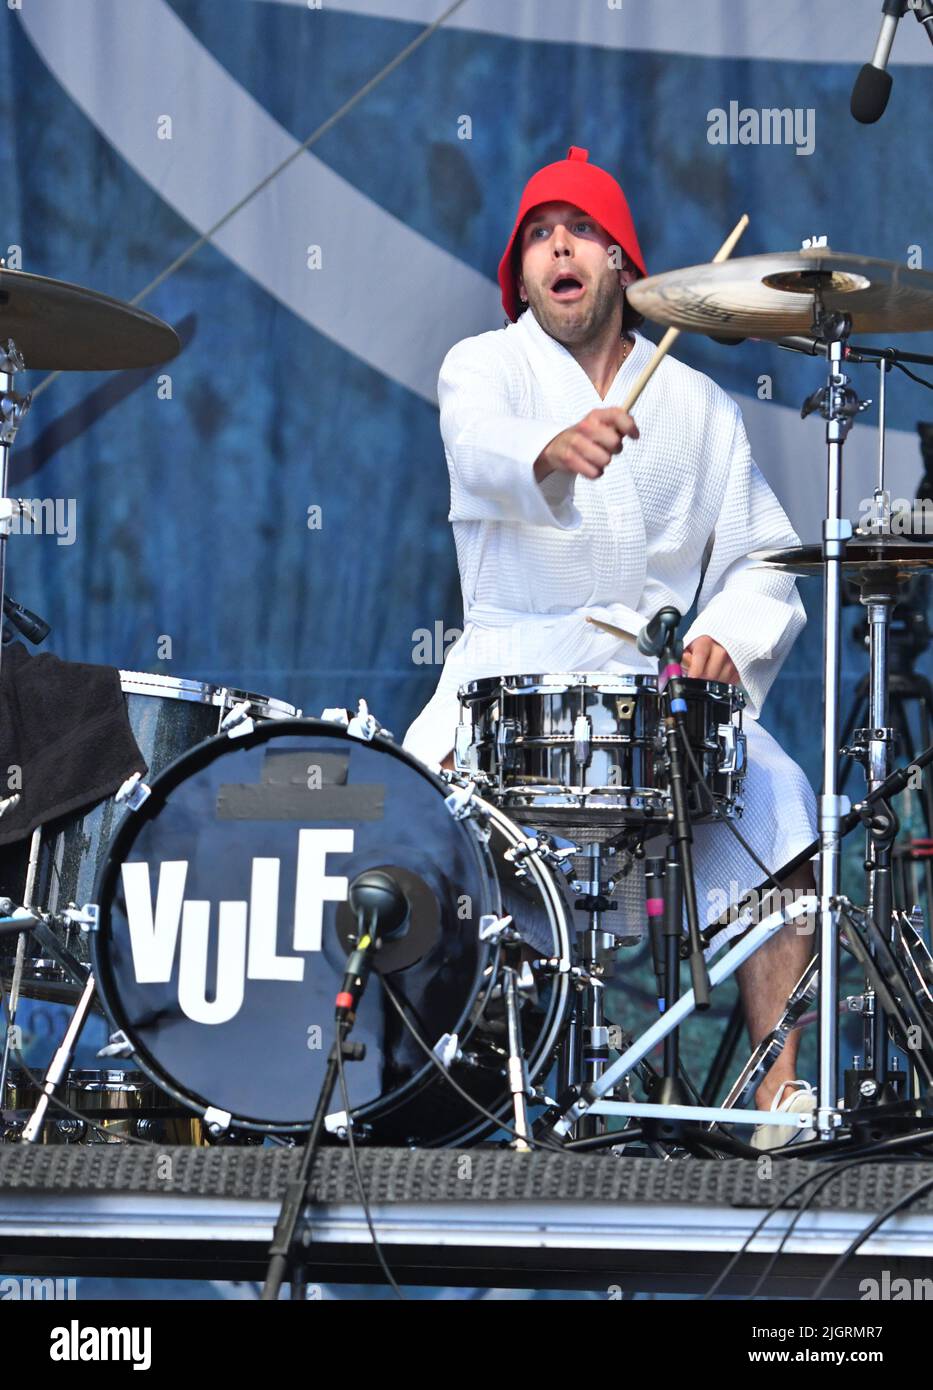 Vulfpeck band members are shown performing on stage during a “live” concert  appearance Stock Photo - Alamy